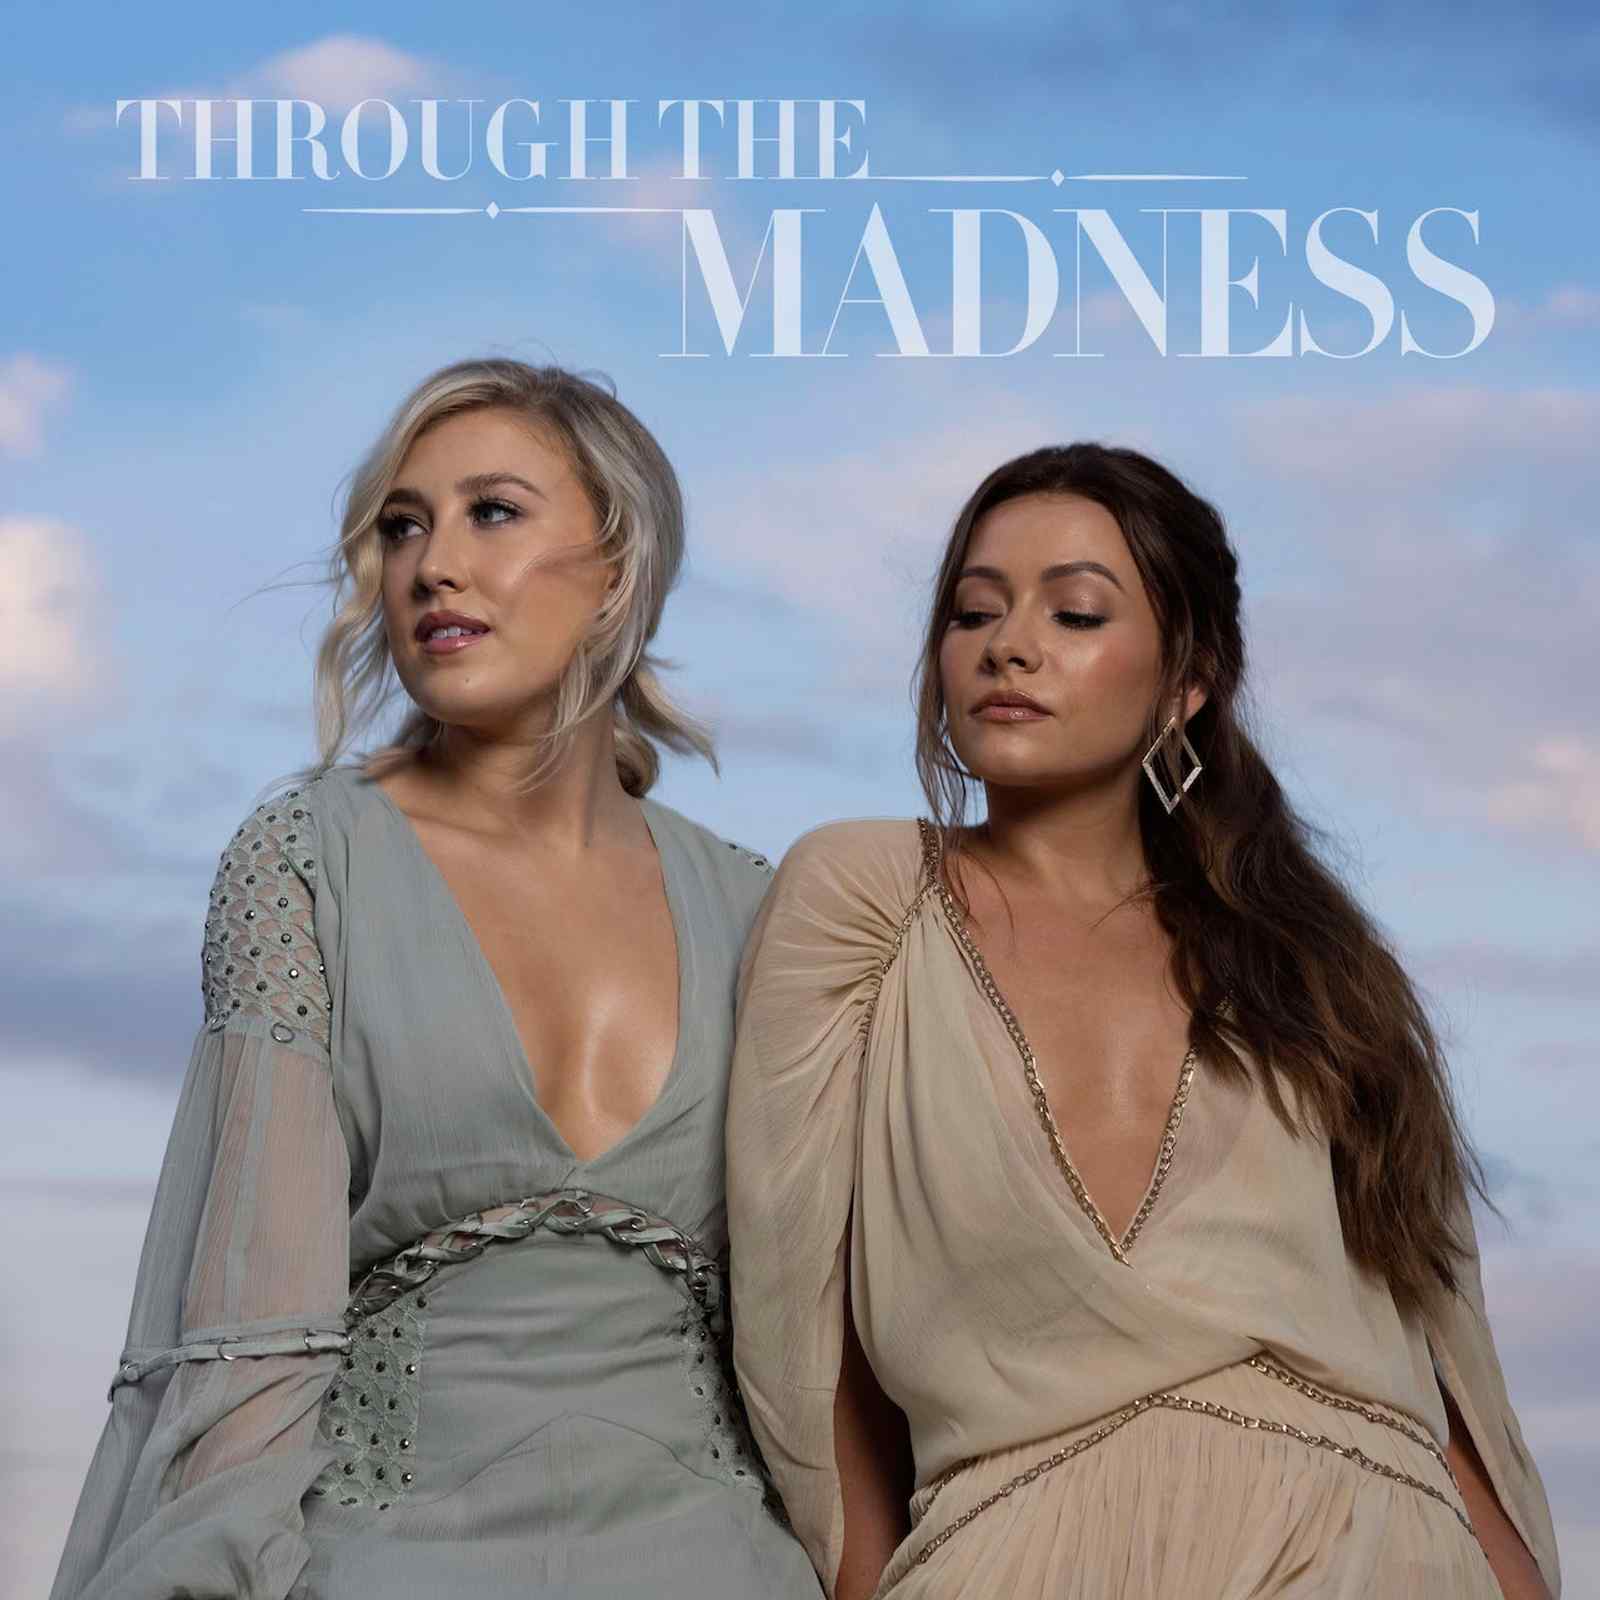 Through the Madness Vol. 1 by Maddie & Tae